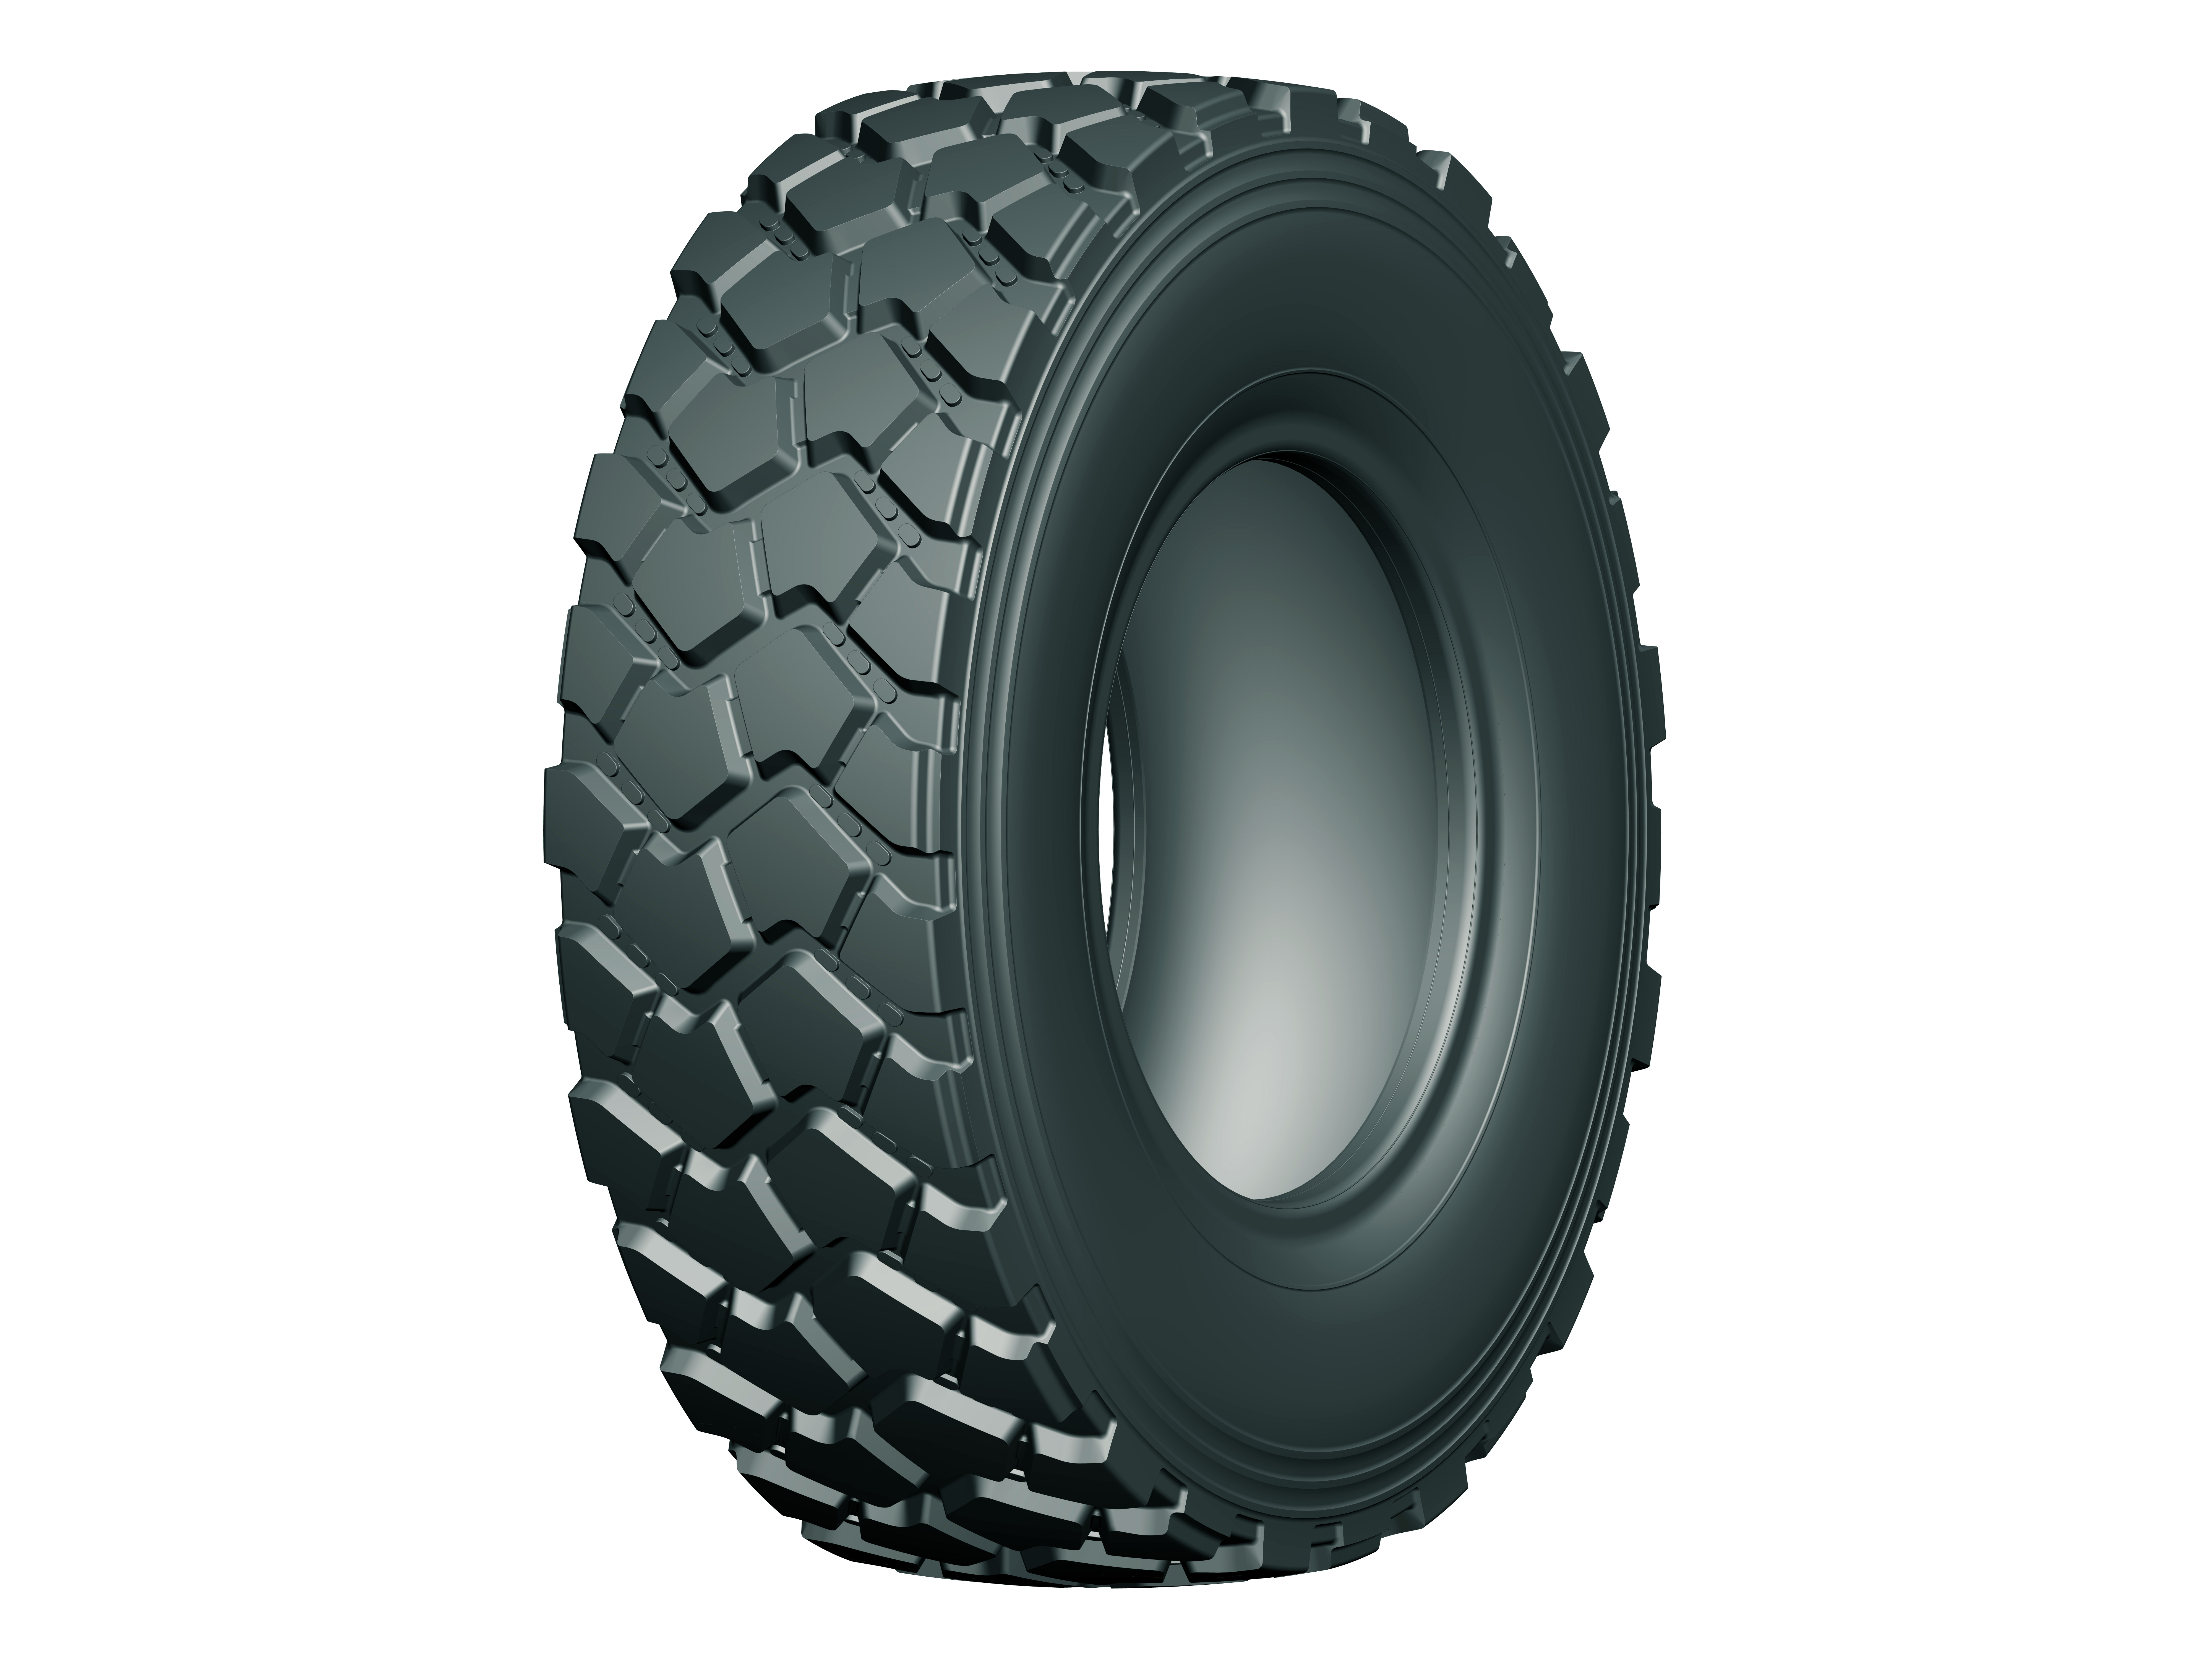 335 80r20 Newpower special tire on off-roads